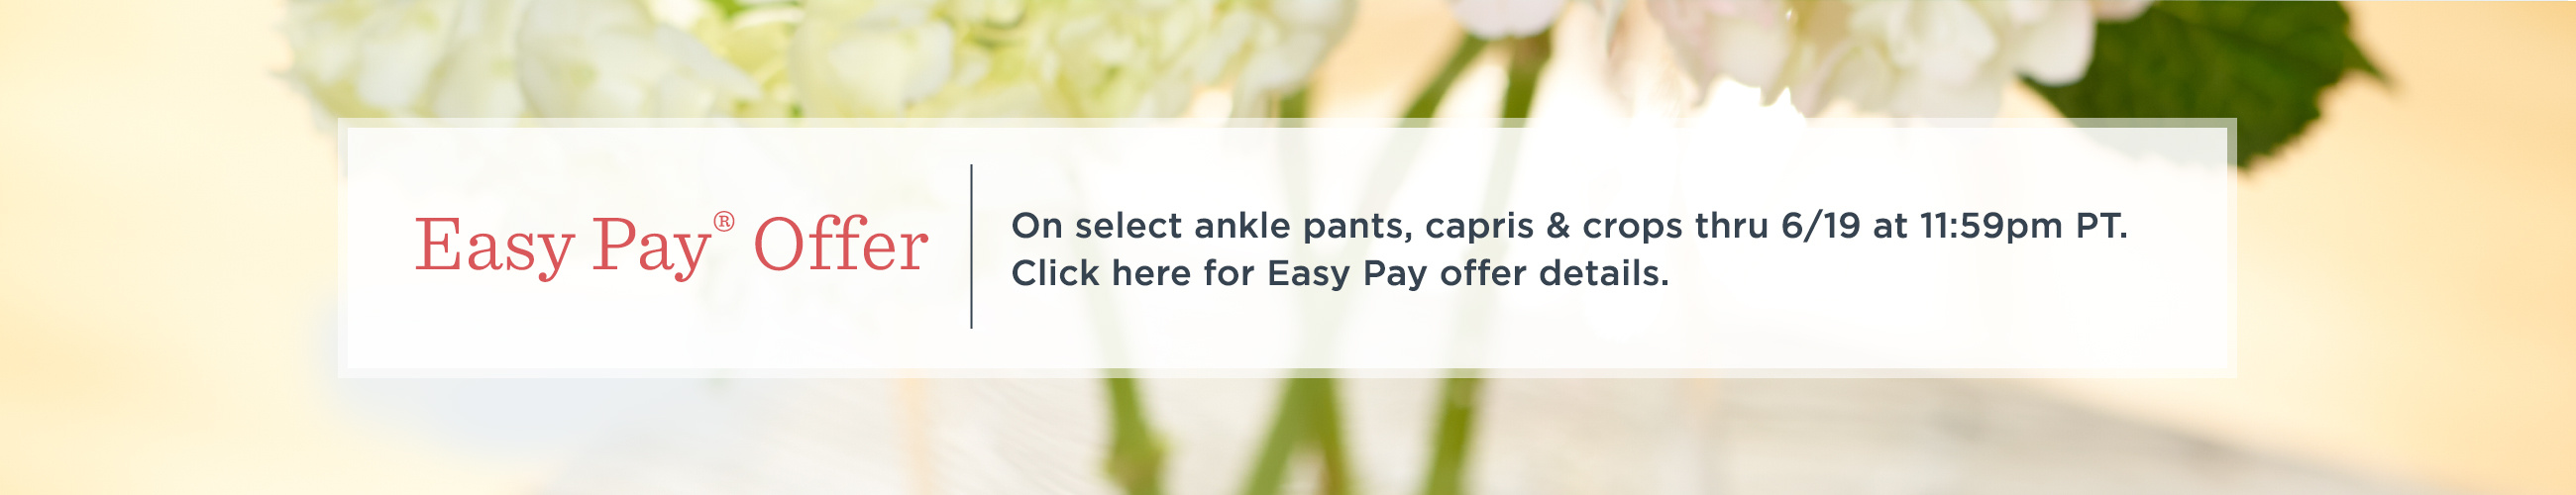 Easy Pay® Offer — On select ankle pants, capris & crops thru 6/19 at 11:59pm PT.  Click here for Easy Pay offer details.